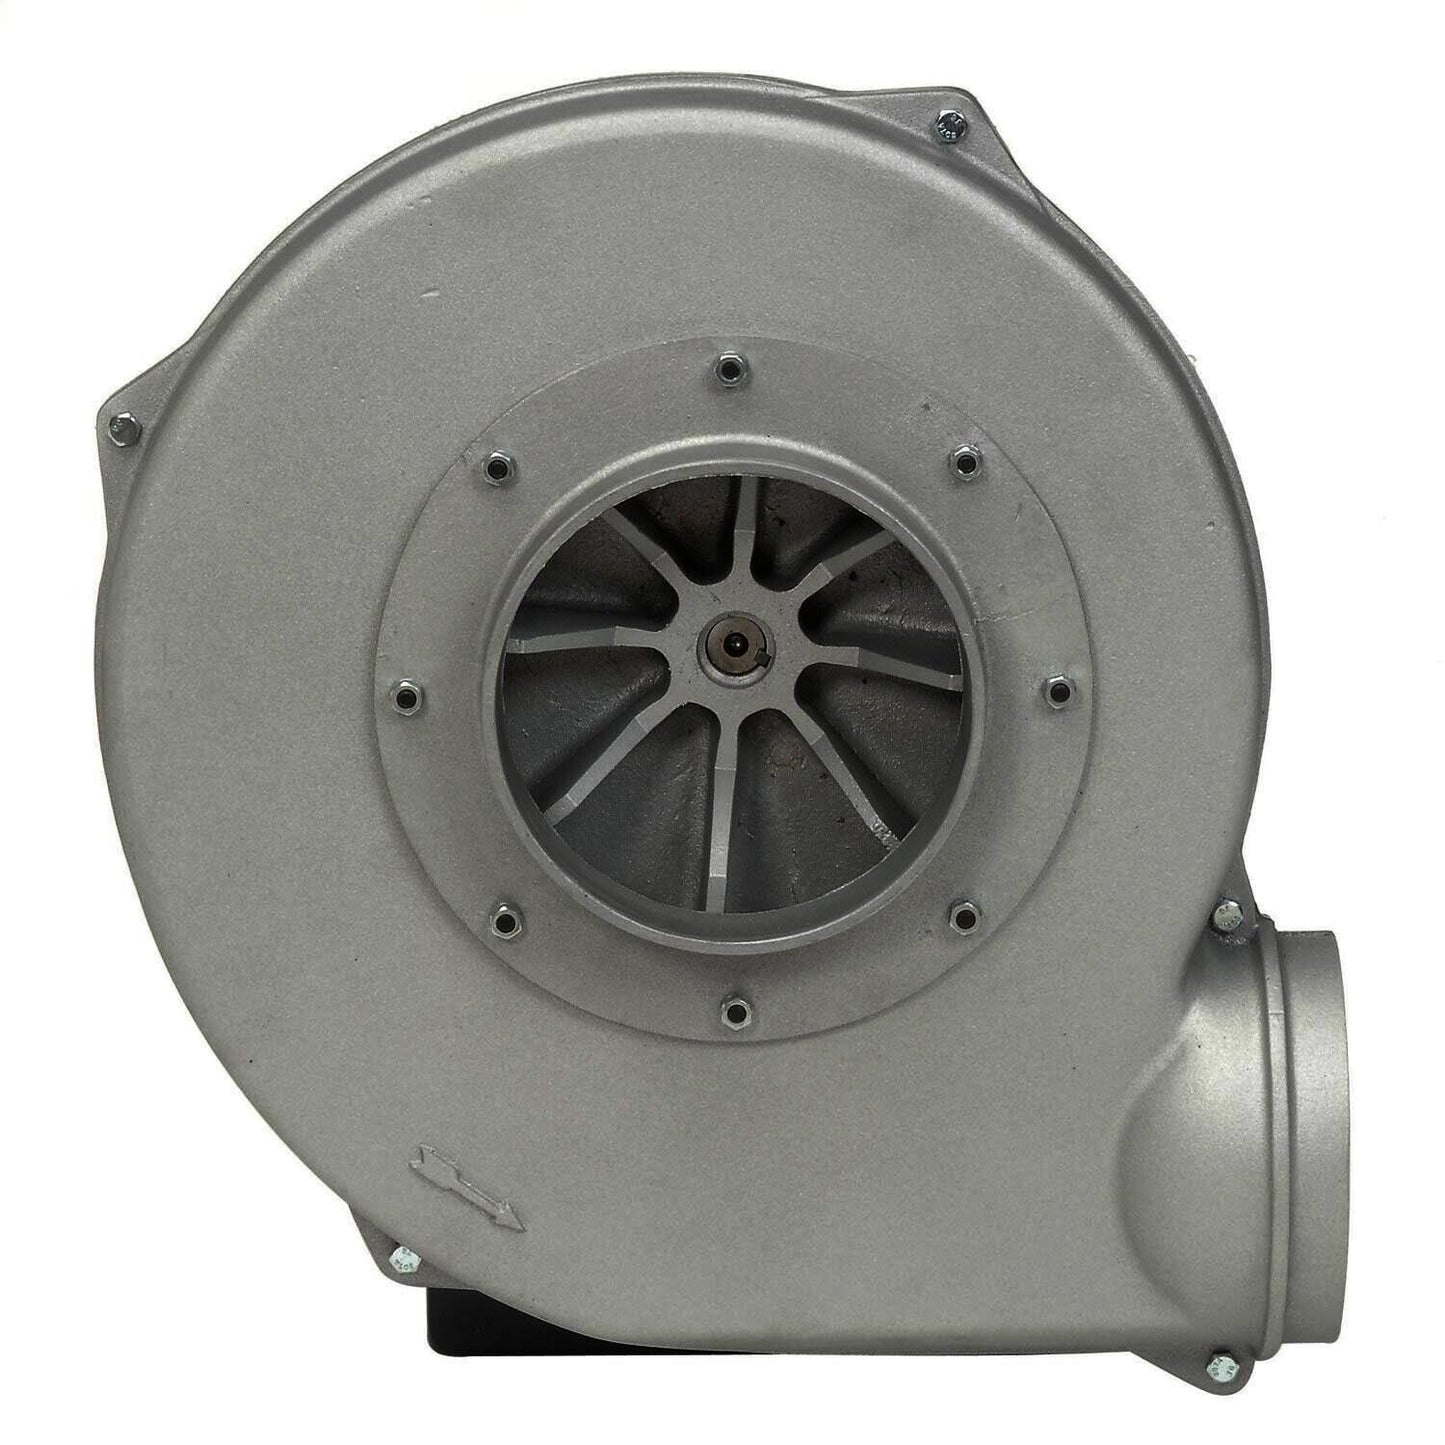 ALUMINUM BLOWER - 1575 CFM - 115/230V - 1 PH - 3 Hp - 8" In / 6" Out - TEFC - BH